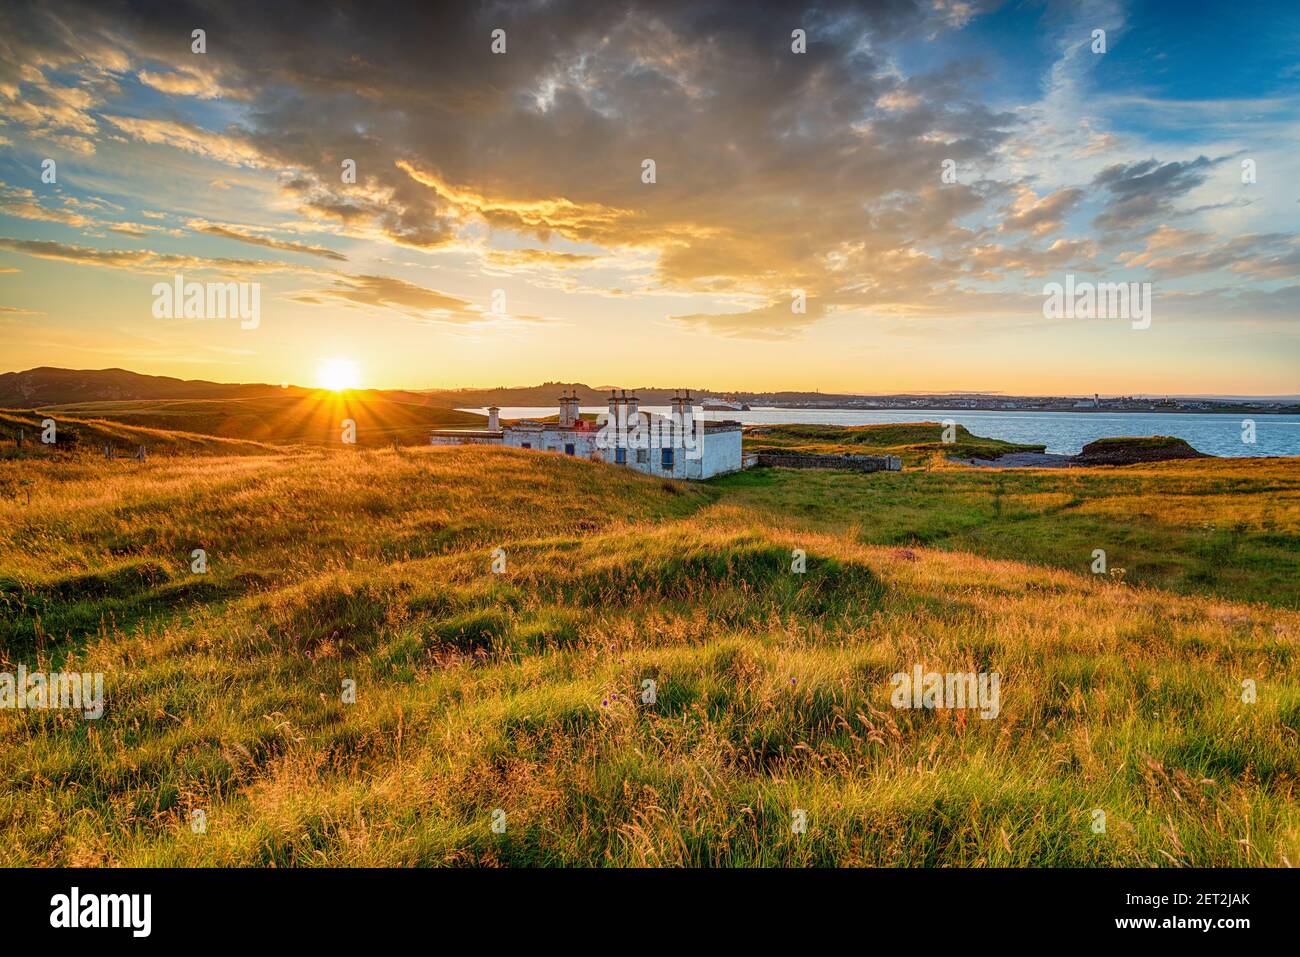 Dramatic sunset over the old coastguard cottages at Arnish Point on the entrance to Stornoway harbour on the Ilse of Lewis in the Western Isles of Sco Stock Photo